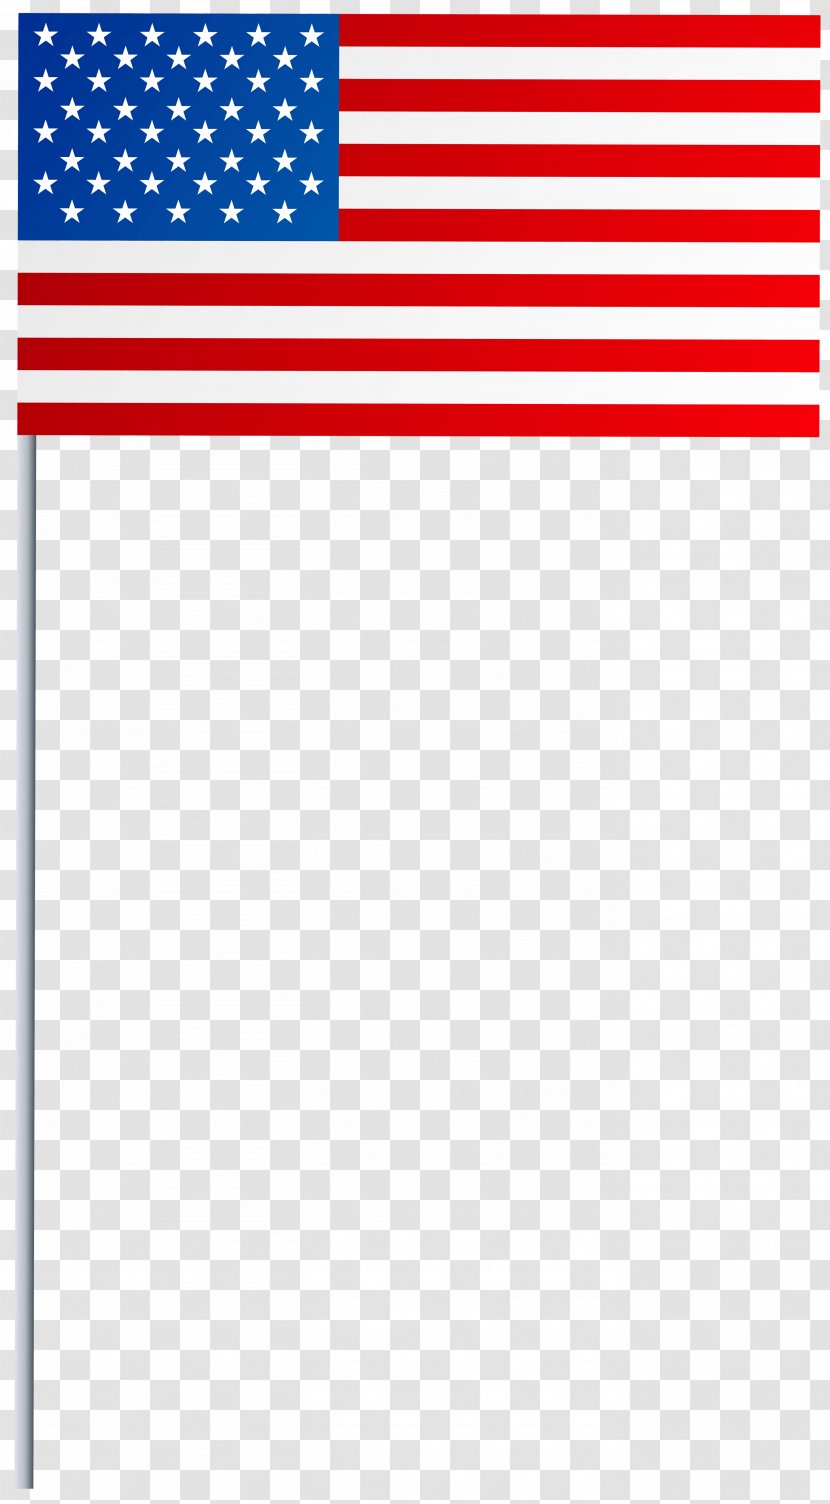 Texas Flag Of The United States Annin & Co. Thin Blue Line - Pattern - USA Clipart Image Transparent PNG